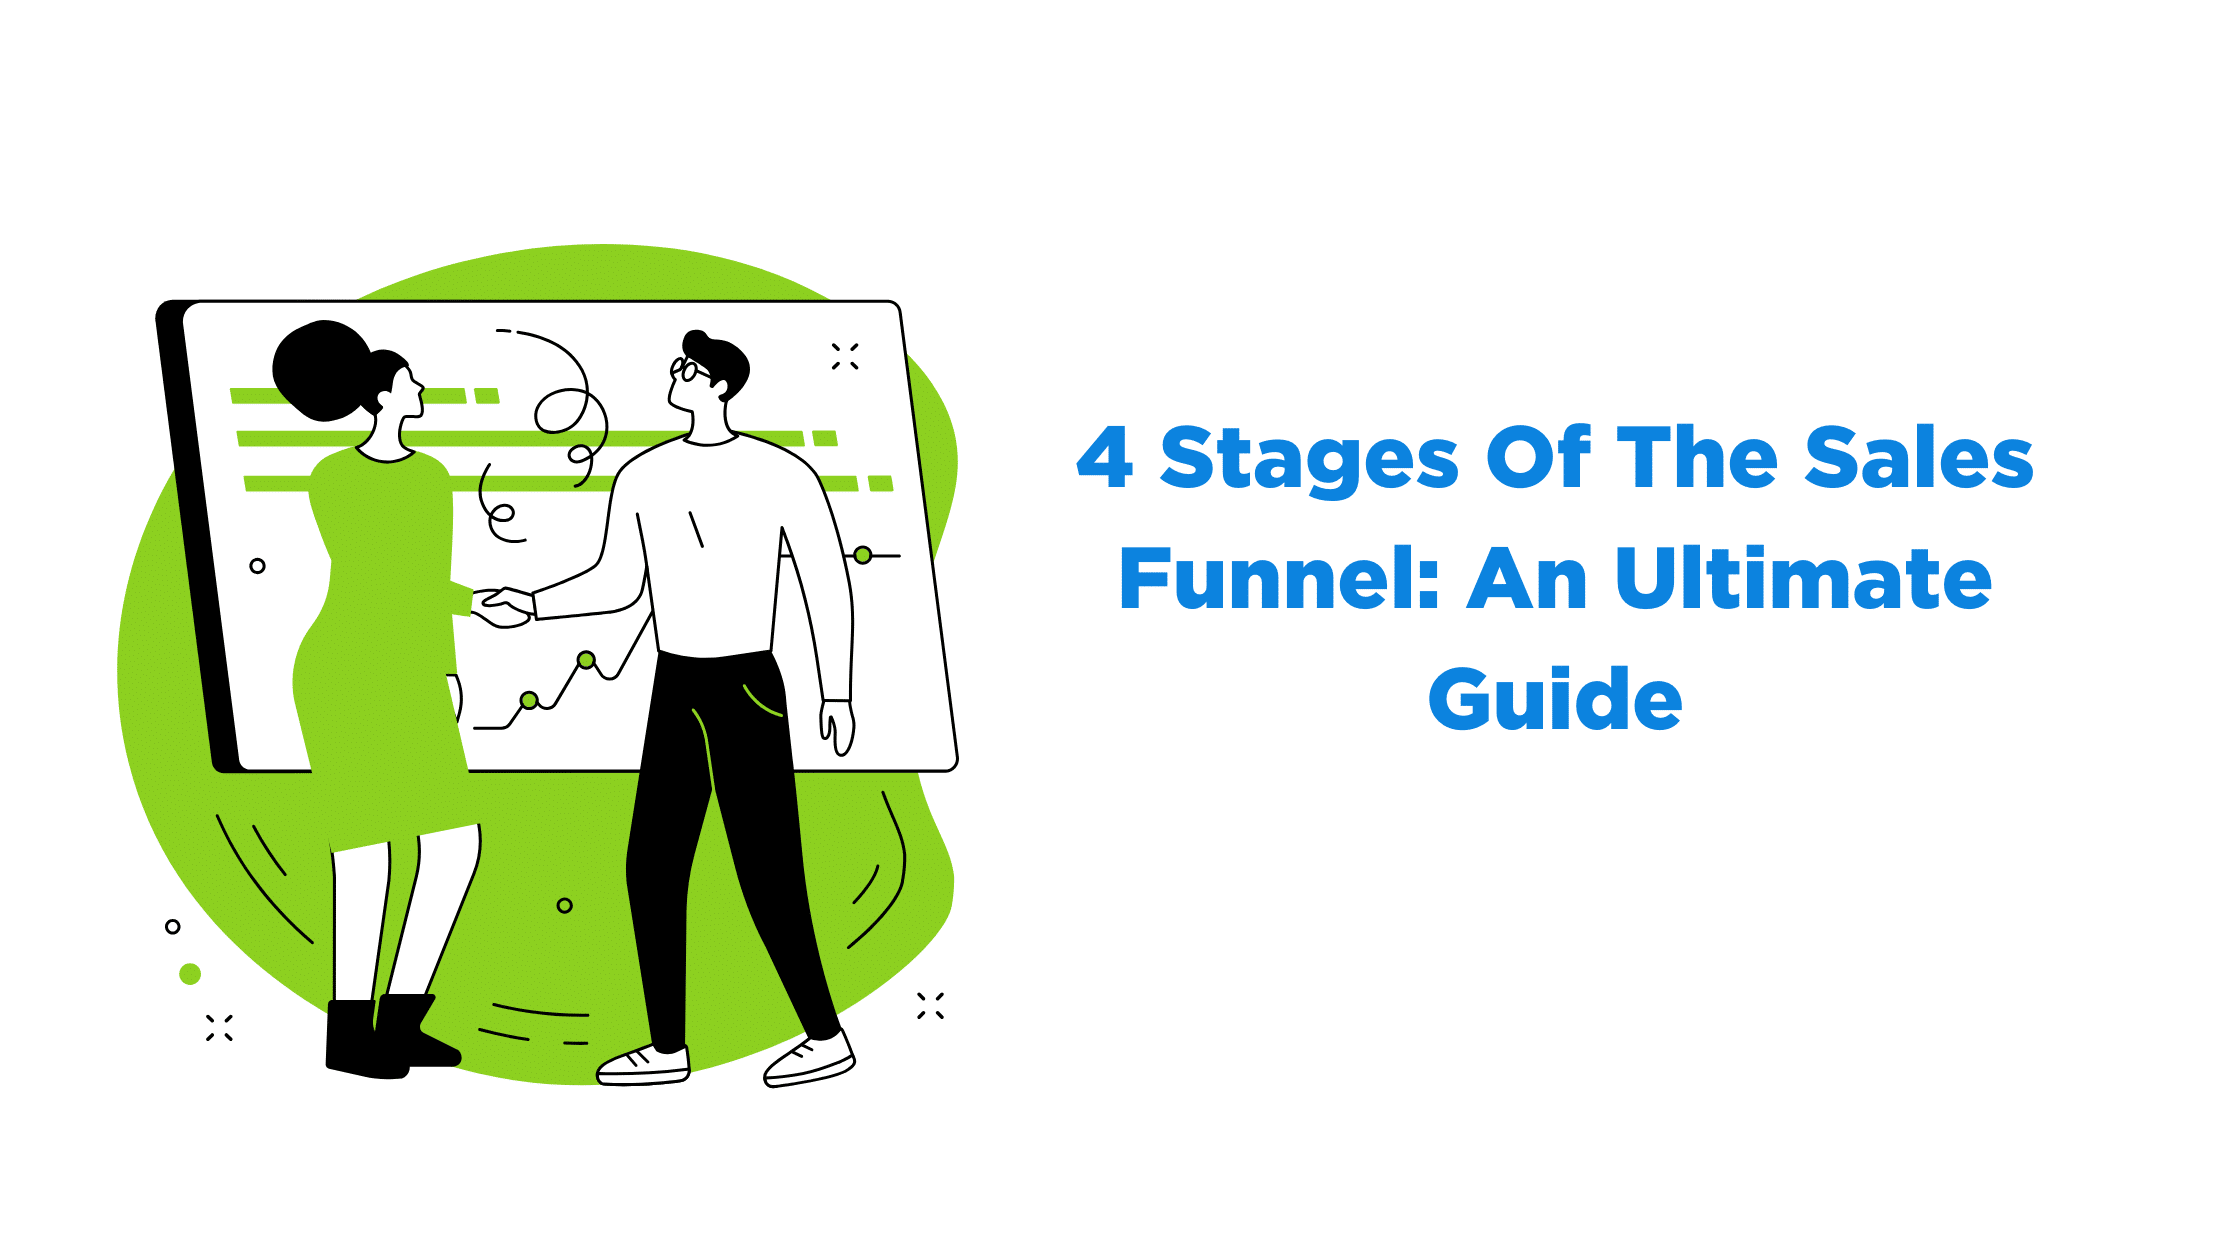 4 Stages Of The Sales Funnel: An Ultimate Guide